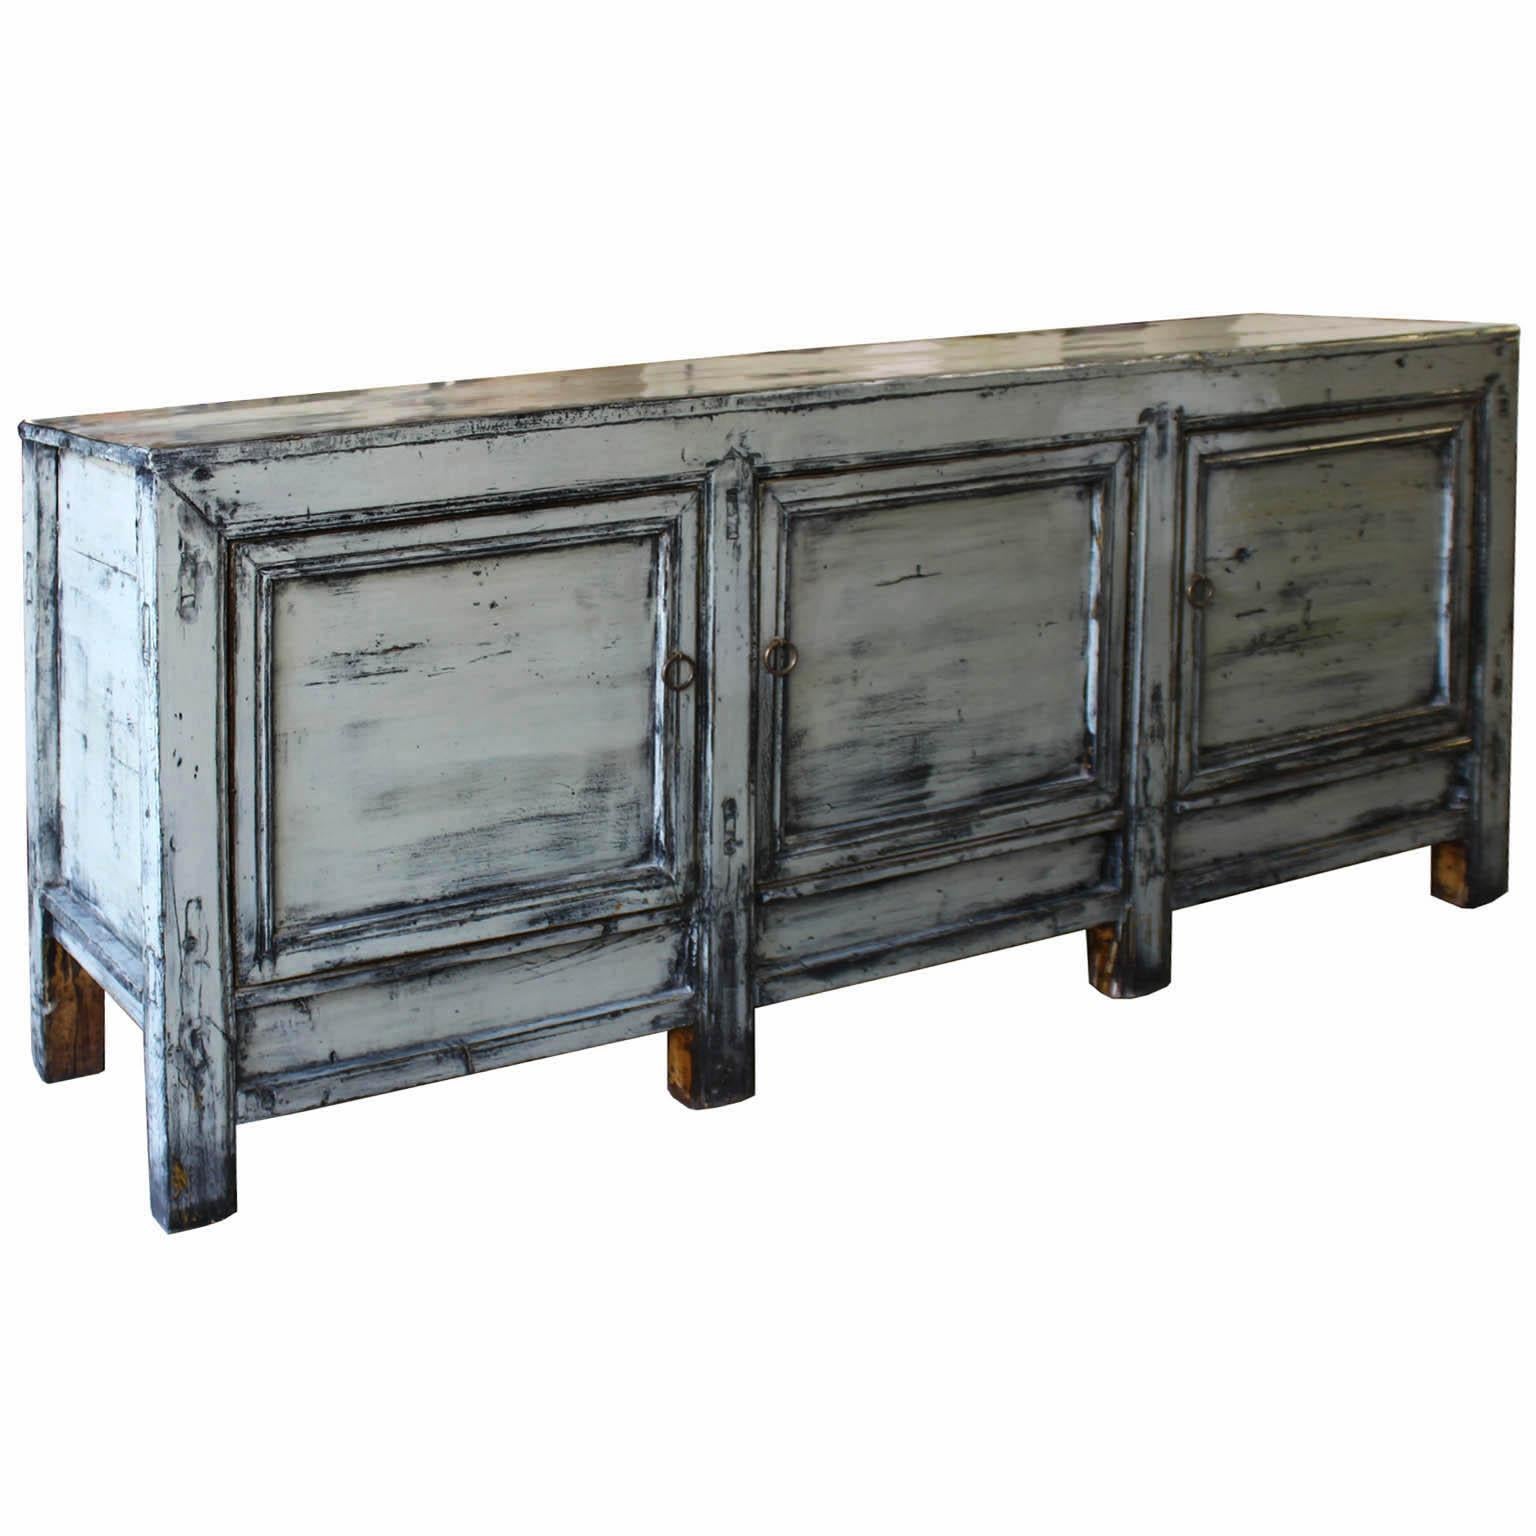 Hand-painted gray lacquer sideboard from Hubei province has modern clean lines with three doors with ample storage. Beautiful beneath artwork or a flat screen TV. New interior shelves and hardware.